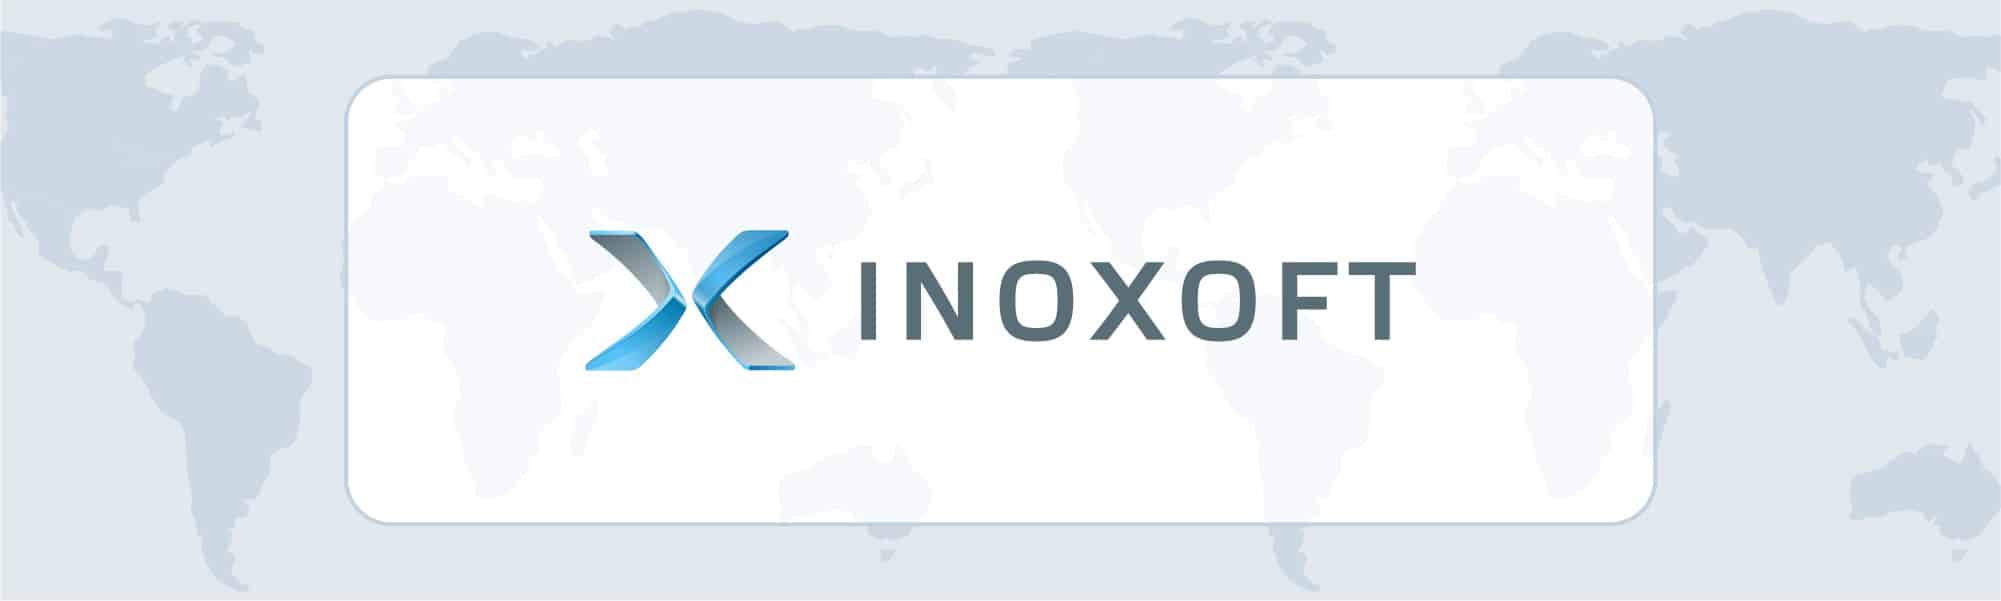 Inoxoft as the Best Company in Data Science and Big Data Analytics in the USA